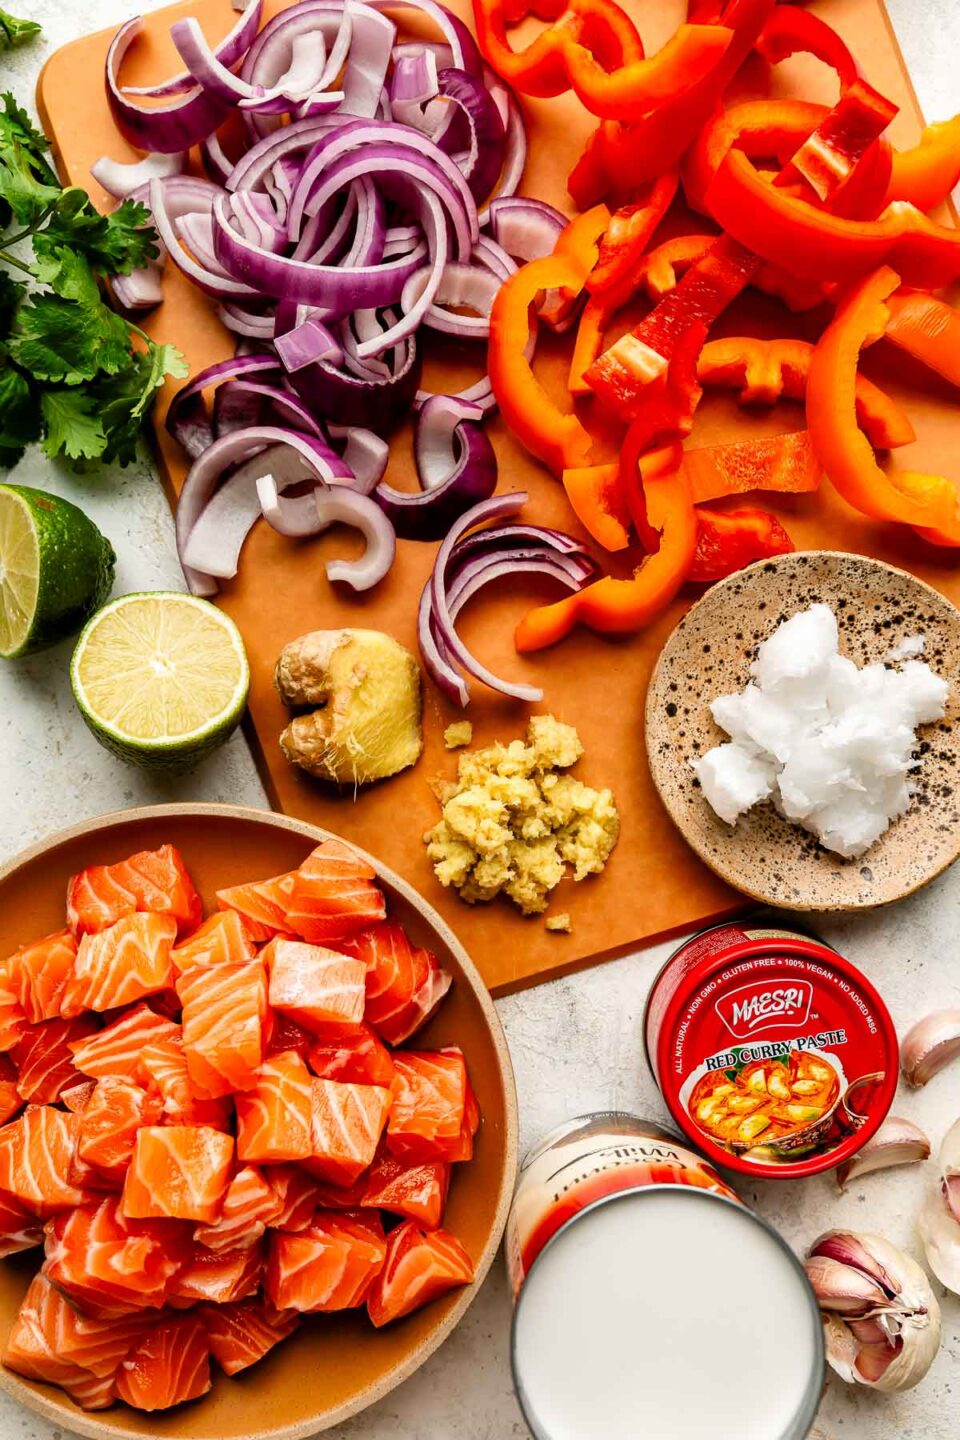 An overhead shot of ingredients displayed on a brown cutting board and a white marbled surface: sliced red pepper and red onion, lime, raw salmon cubes, garlic, ginger, cilantro, coconut milk, and red curry paste.